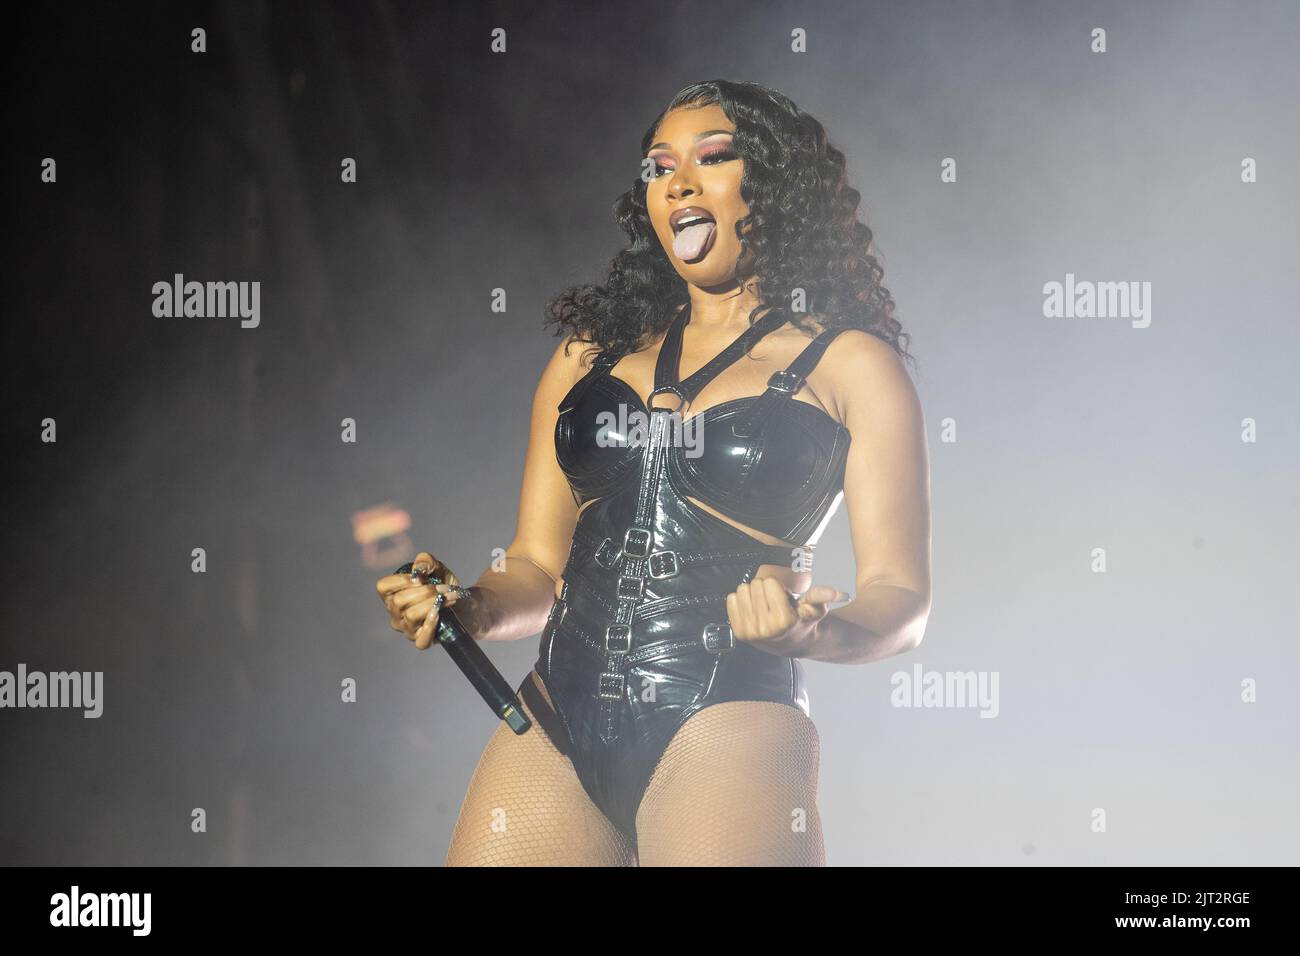 Leeds, UK. Saturday 27 August 2022.  Megan Jovon Ruth Pete, known professionally as Megan Thee Stallion live on stage during day 2 of  Leeds Festival 2022.,© Jason Richardson / Alamy Live News Stock Photo